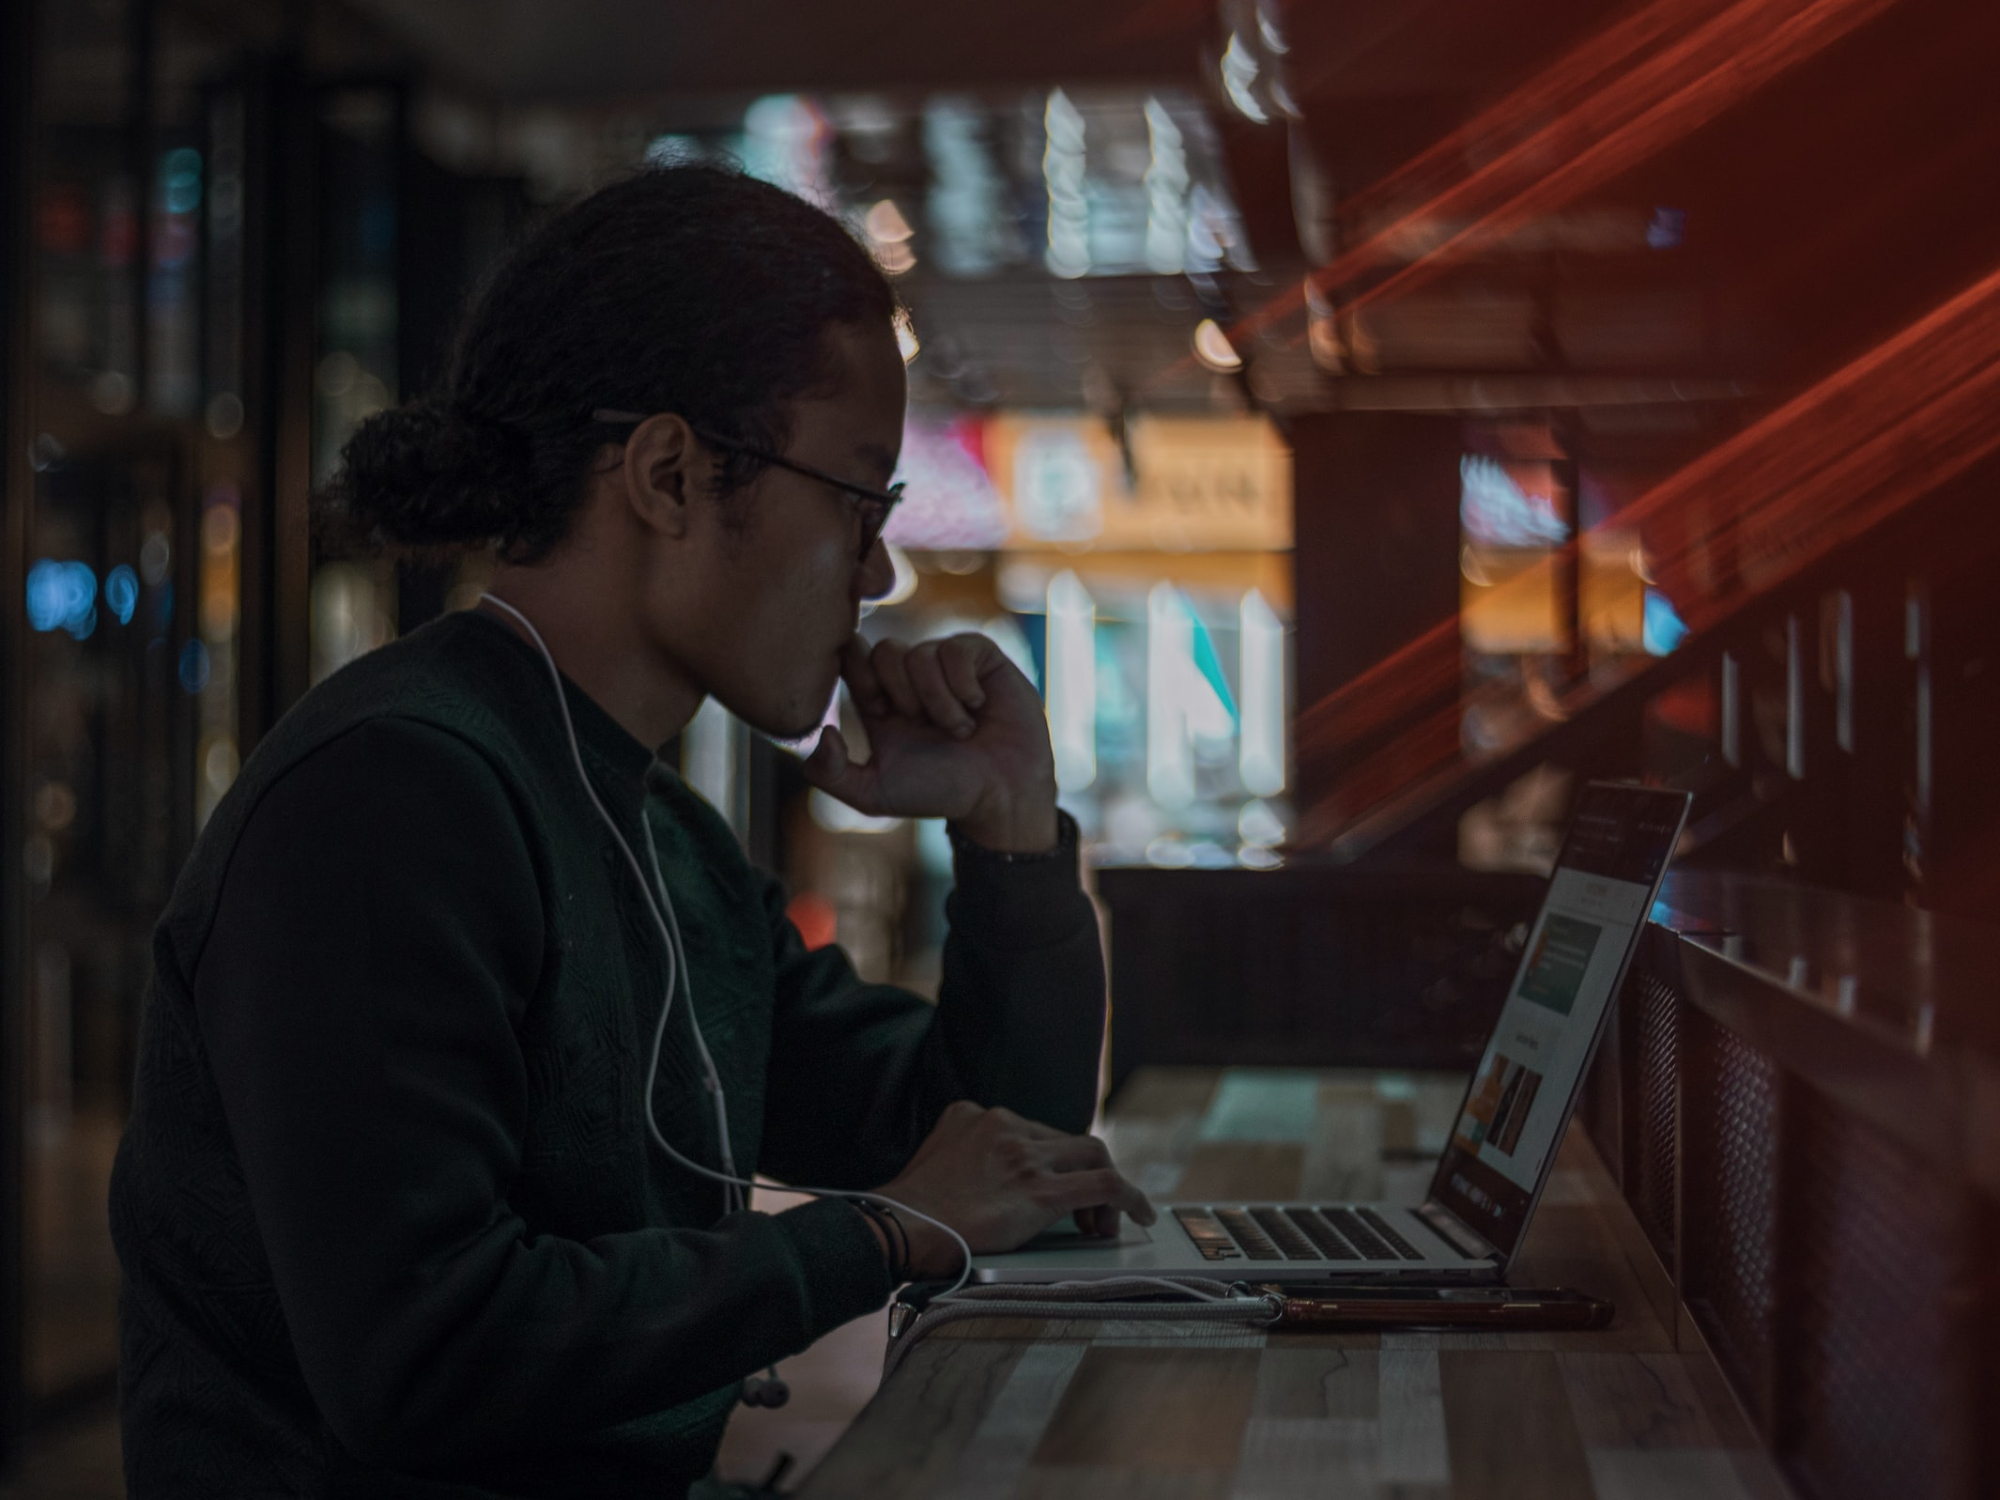 A person sitting in a cafe at night, using a laptop.